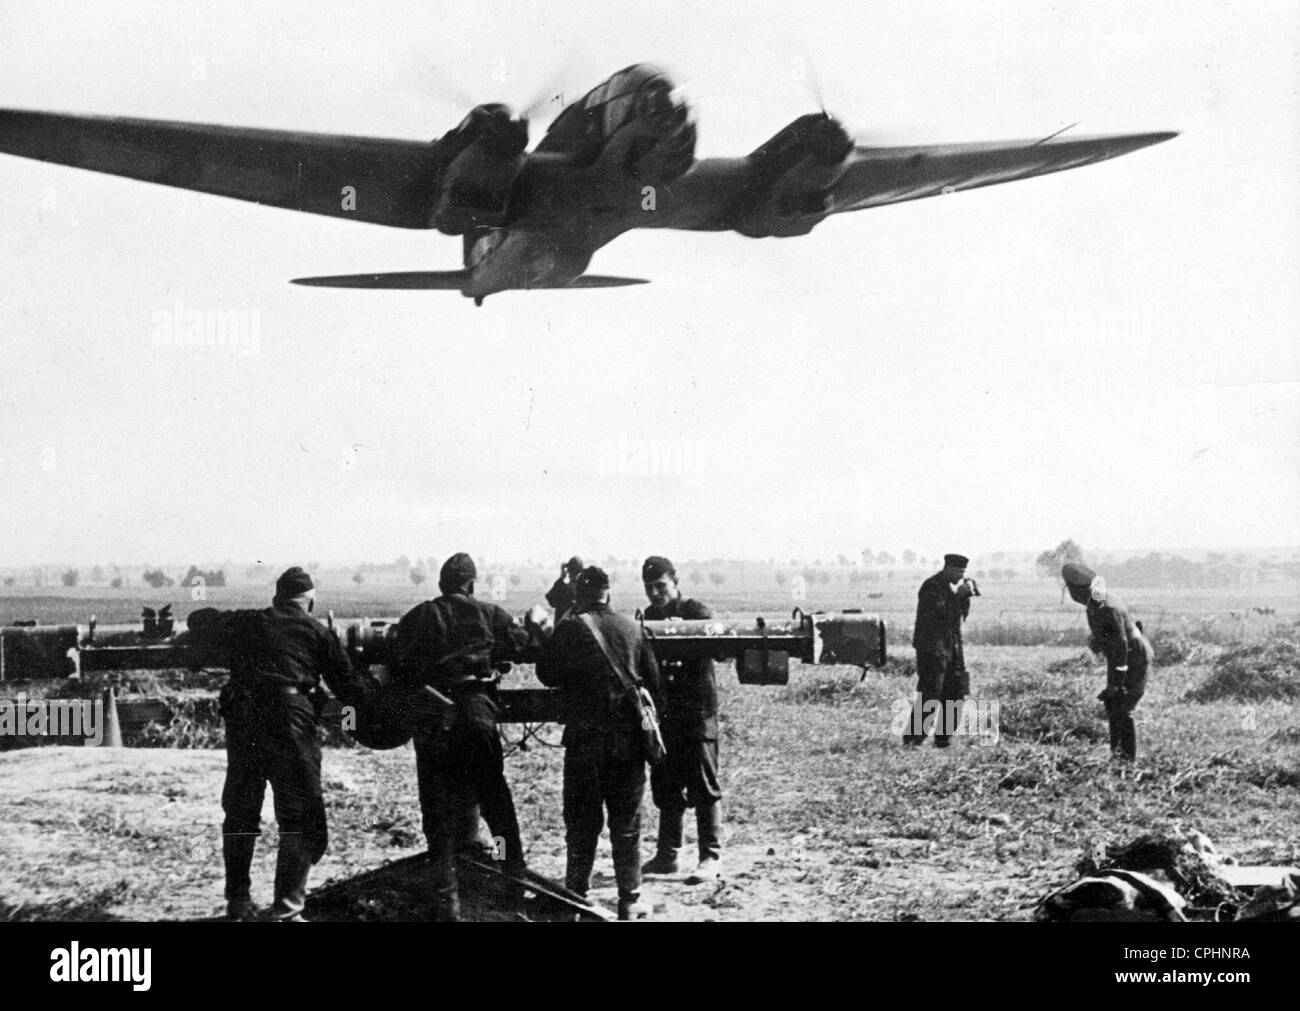 A German plane setting off to attack Poland with soldiers from a flak battery in the foreground, September 1939 (b/w Stock Photo